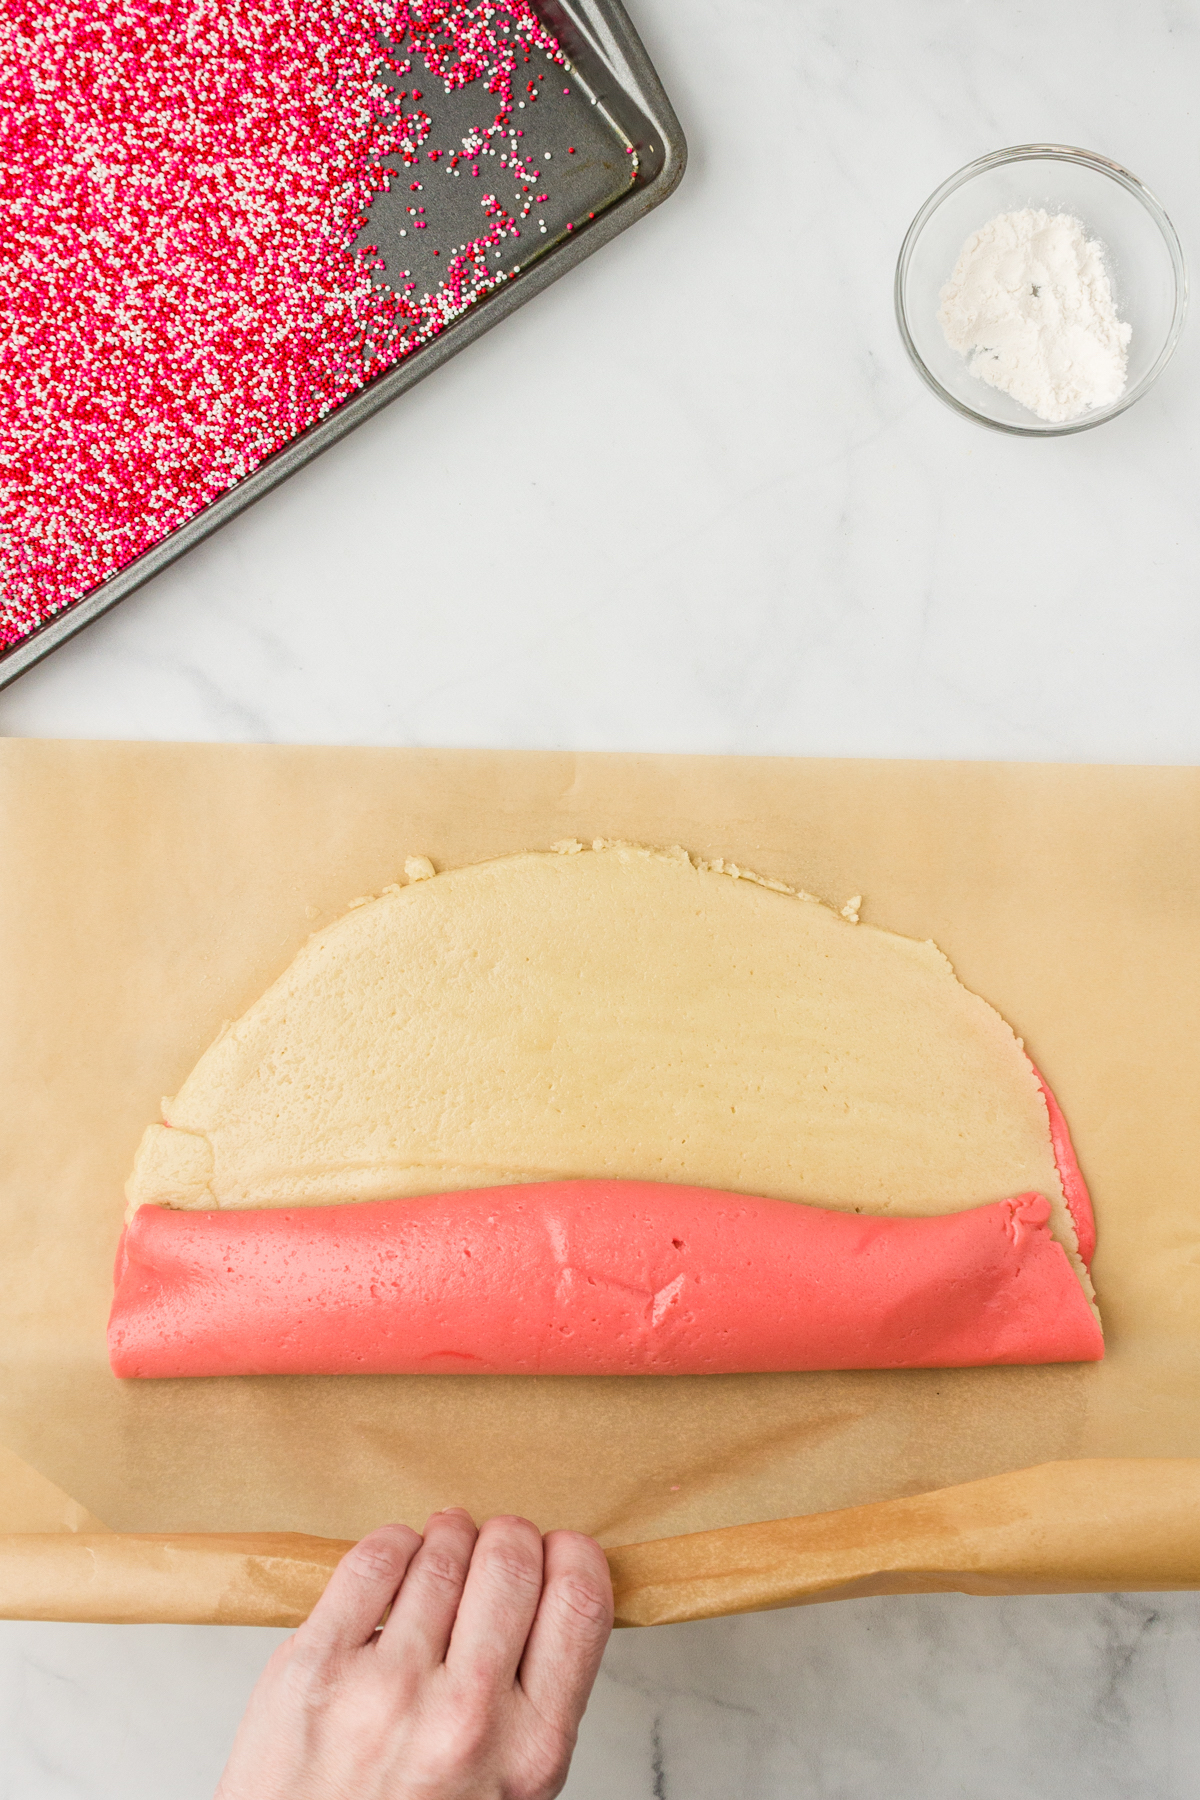 Both red and plain dough rolling into a new combined roll for pinwheel cookie recipe.